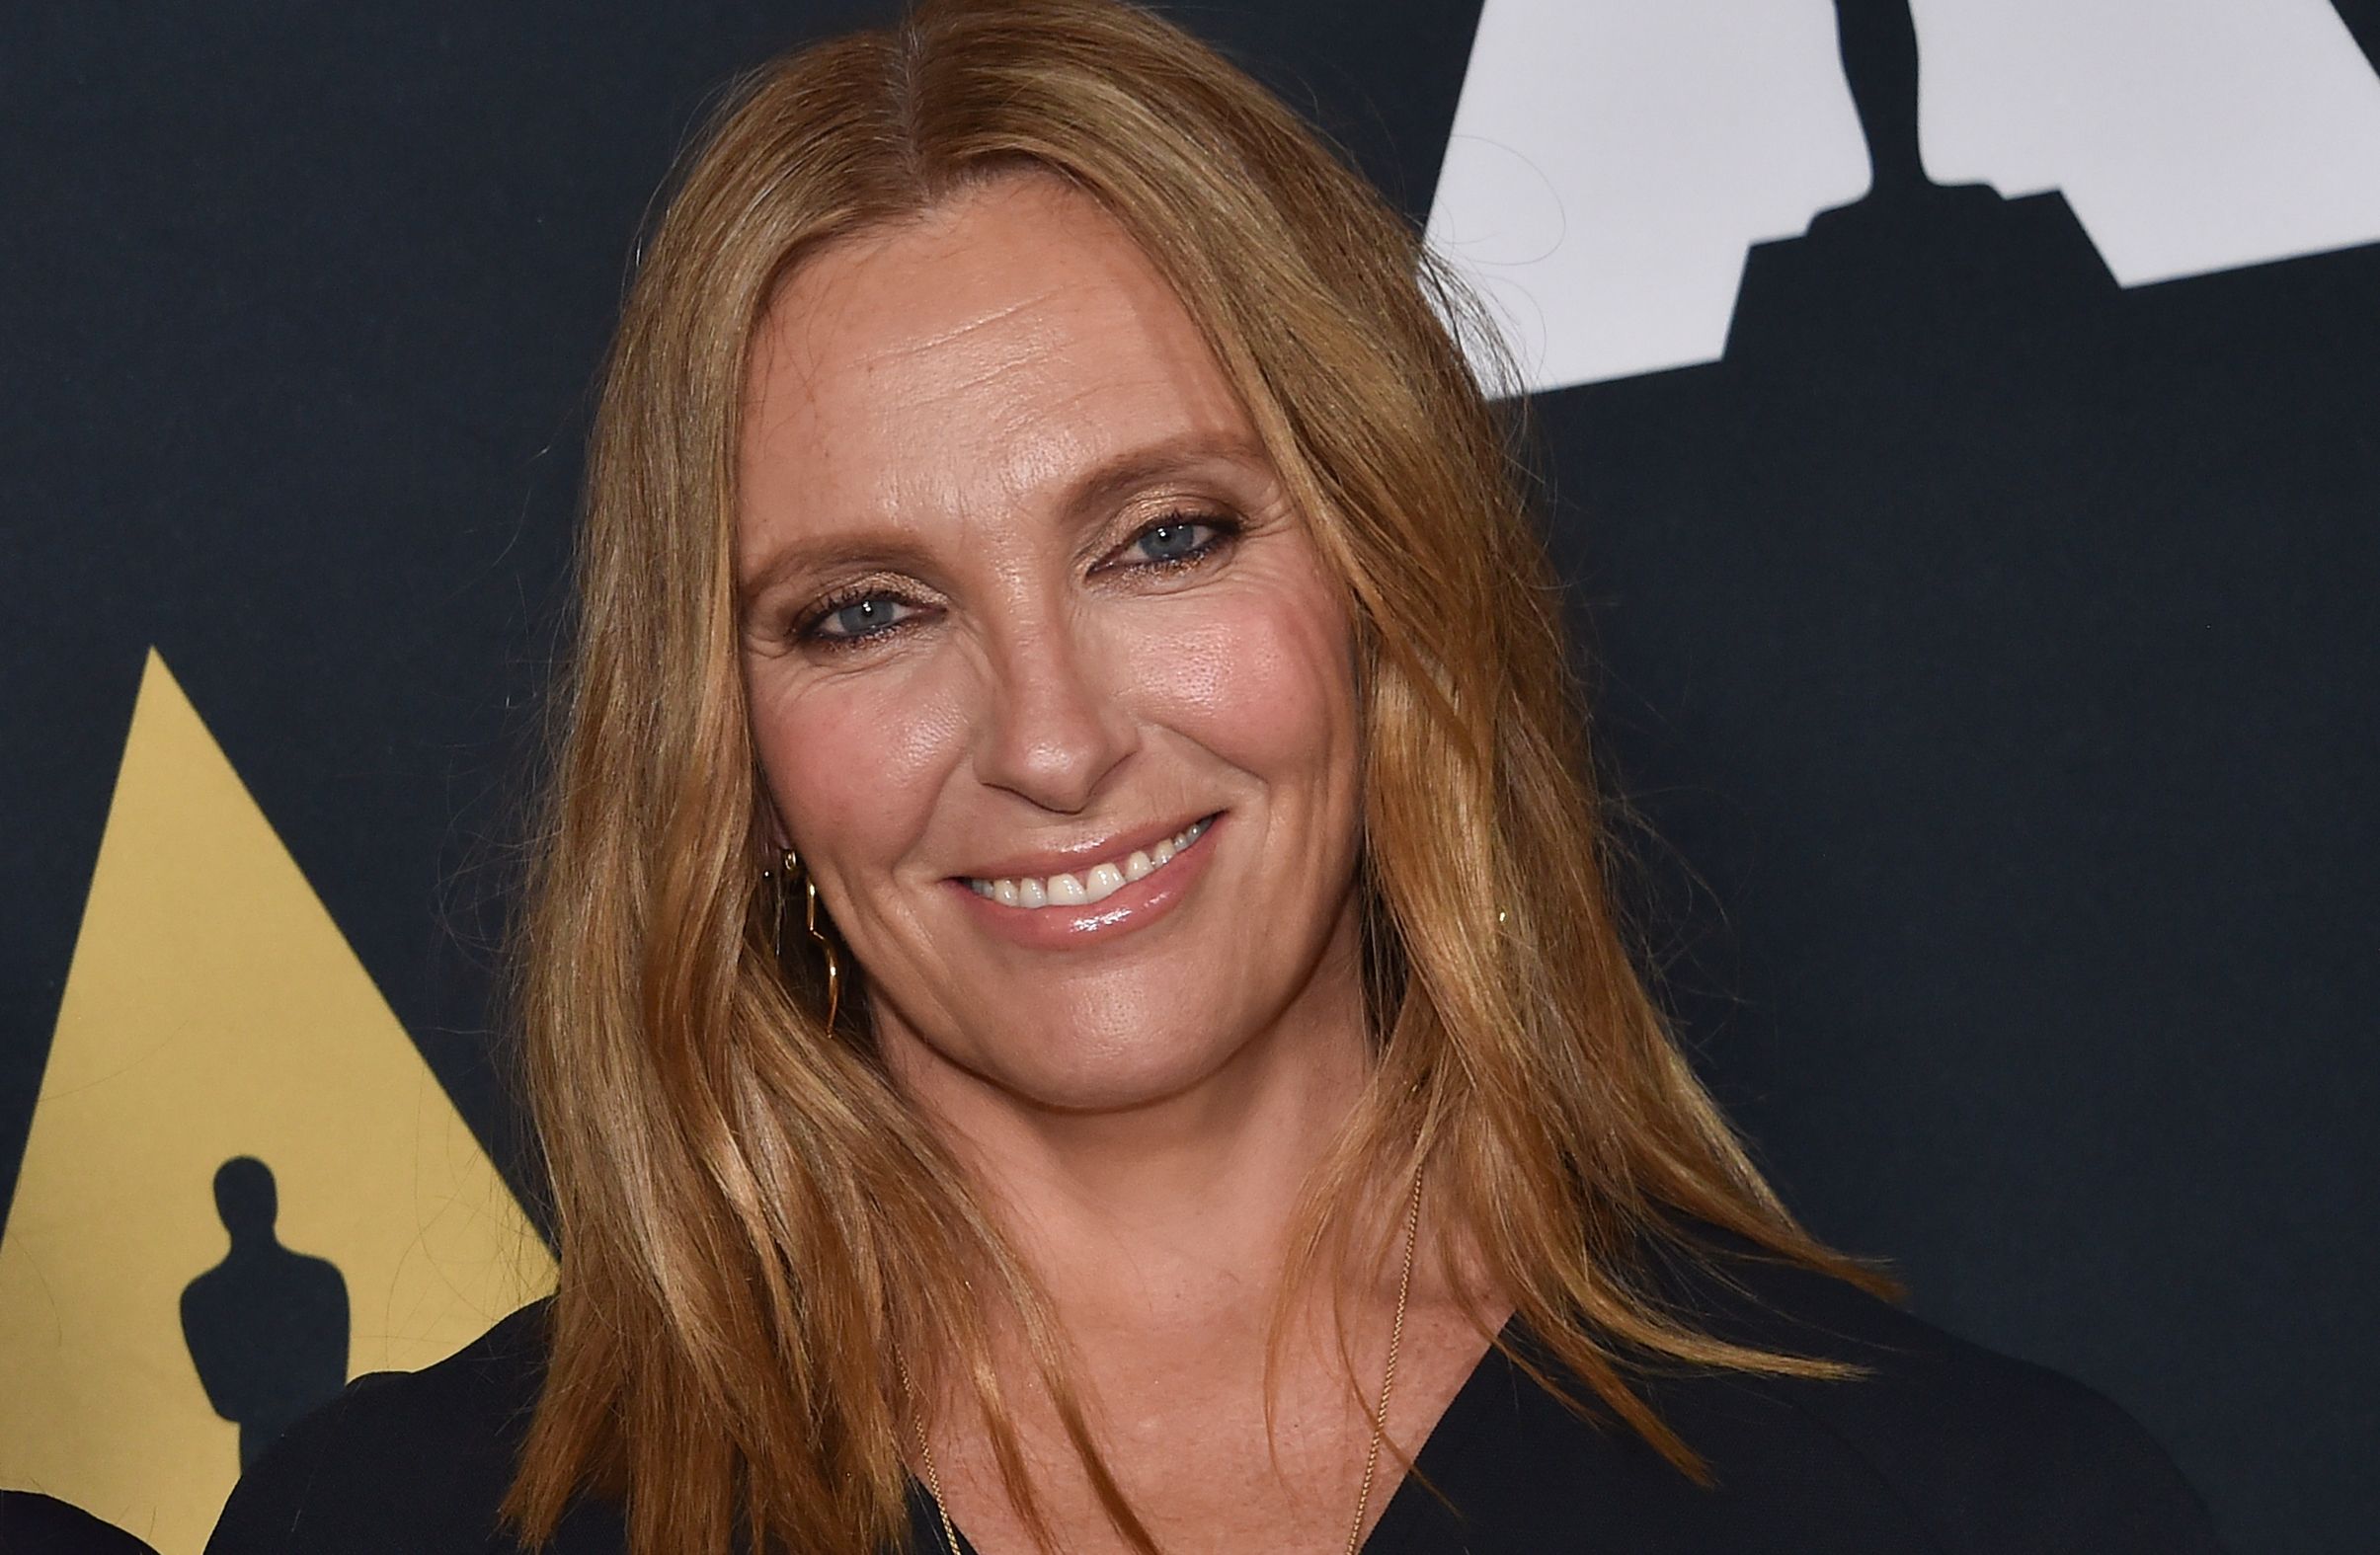 Toni Collette Announces Divorce With Husband Of 19 Years Amid Cheating